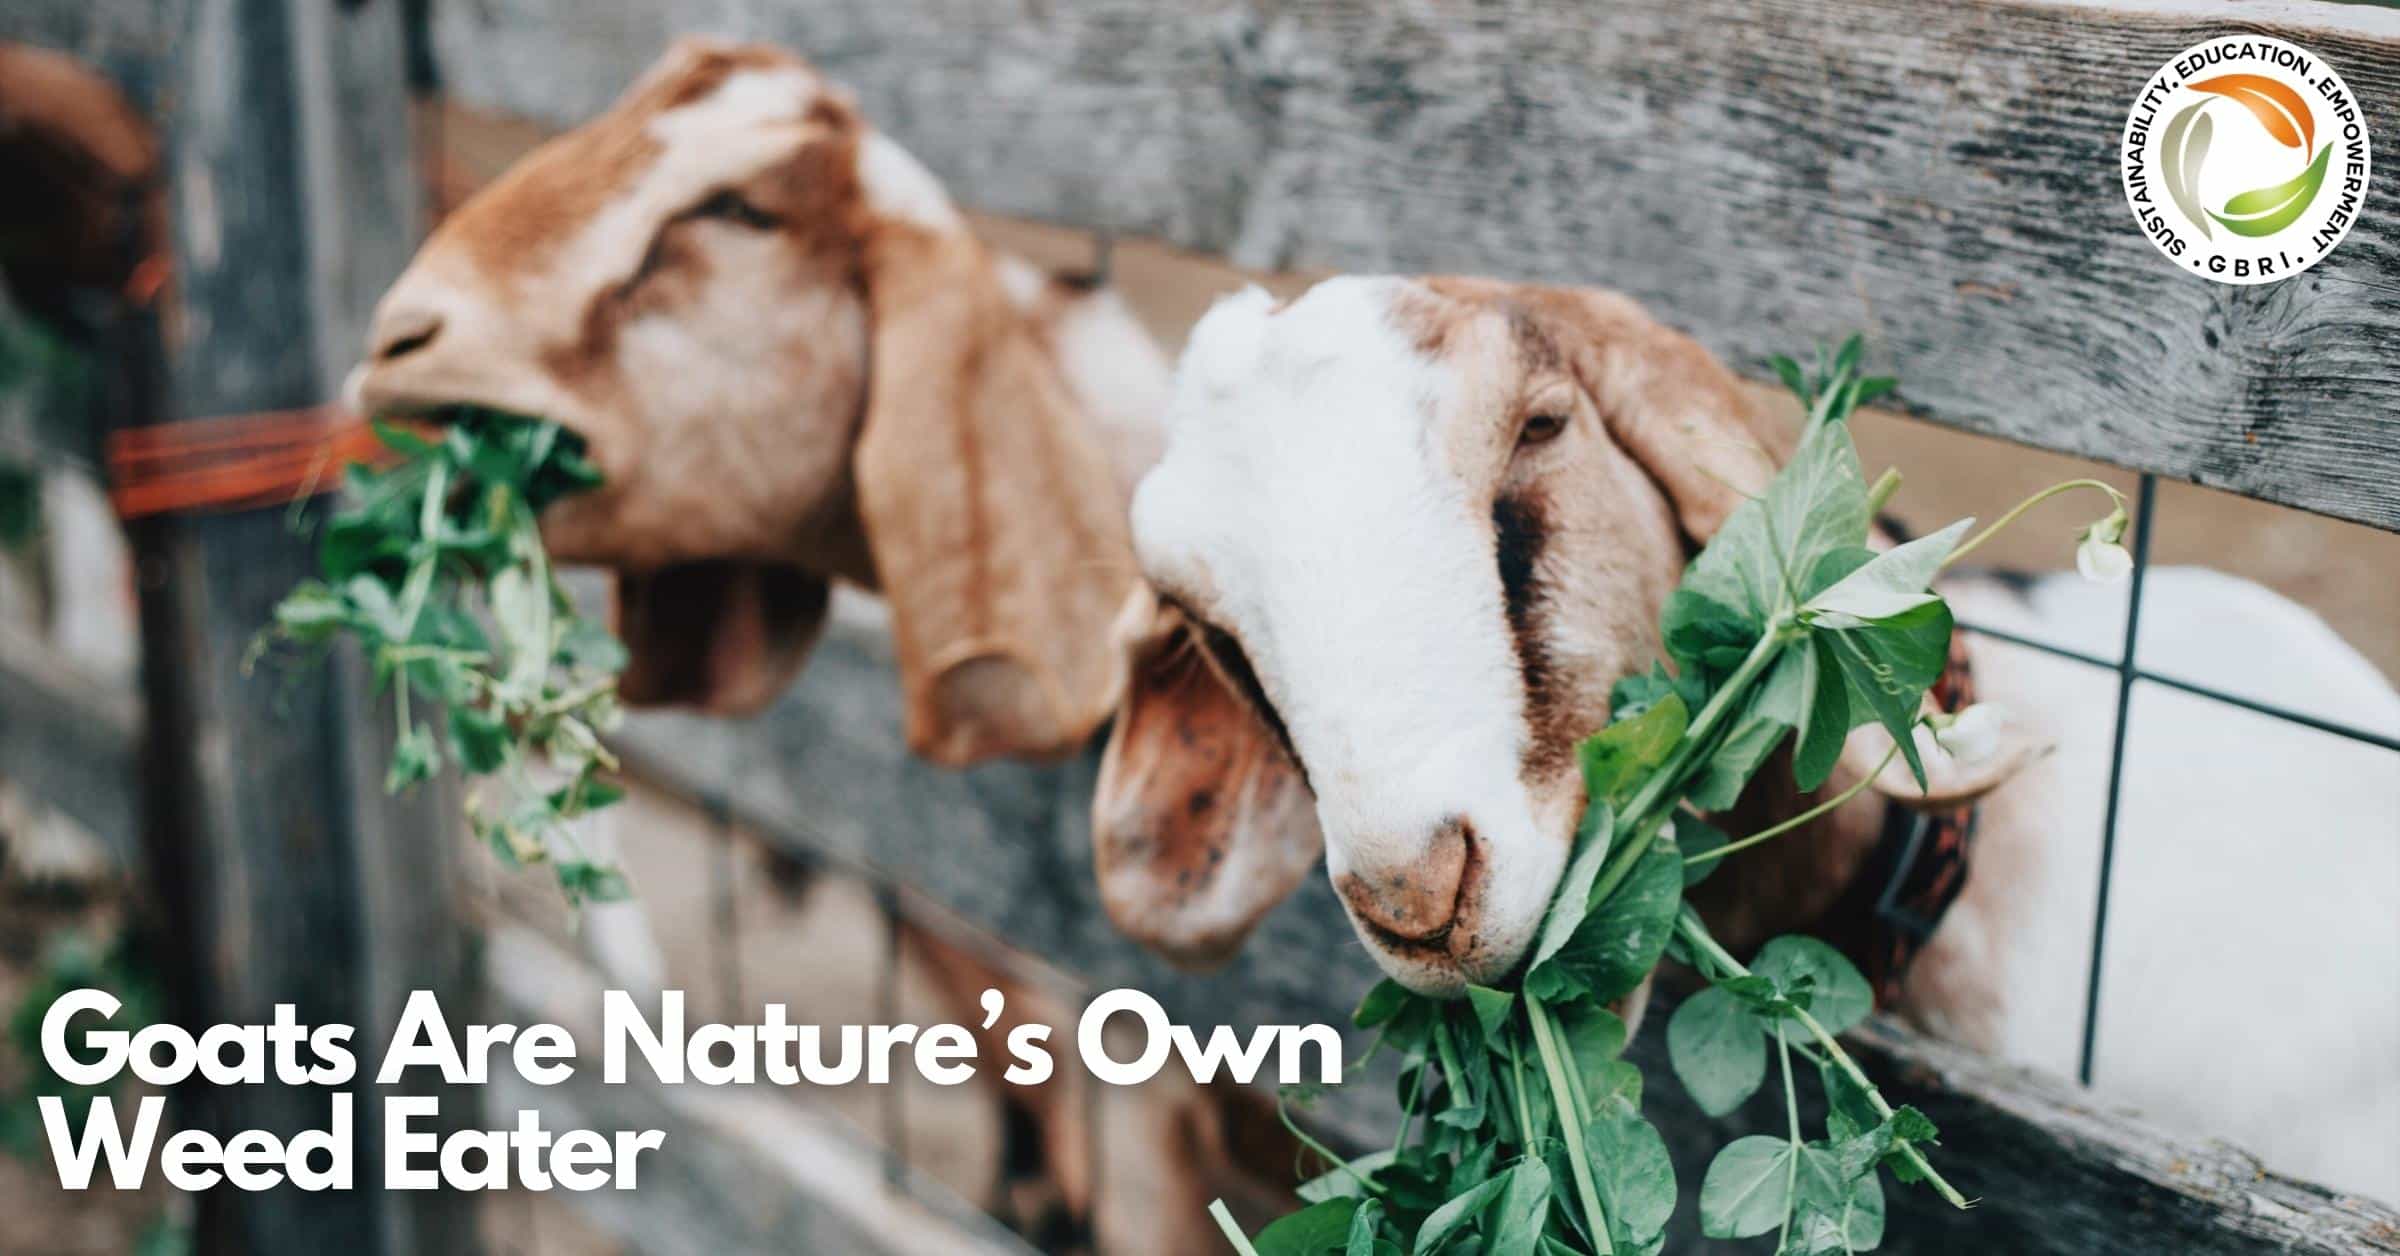 Goats Are Nature’s Own Weed Eater